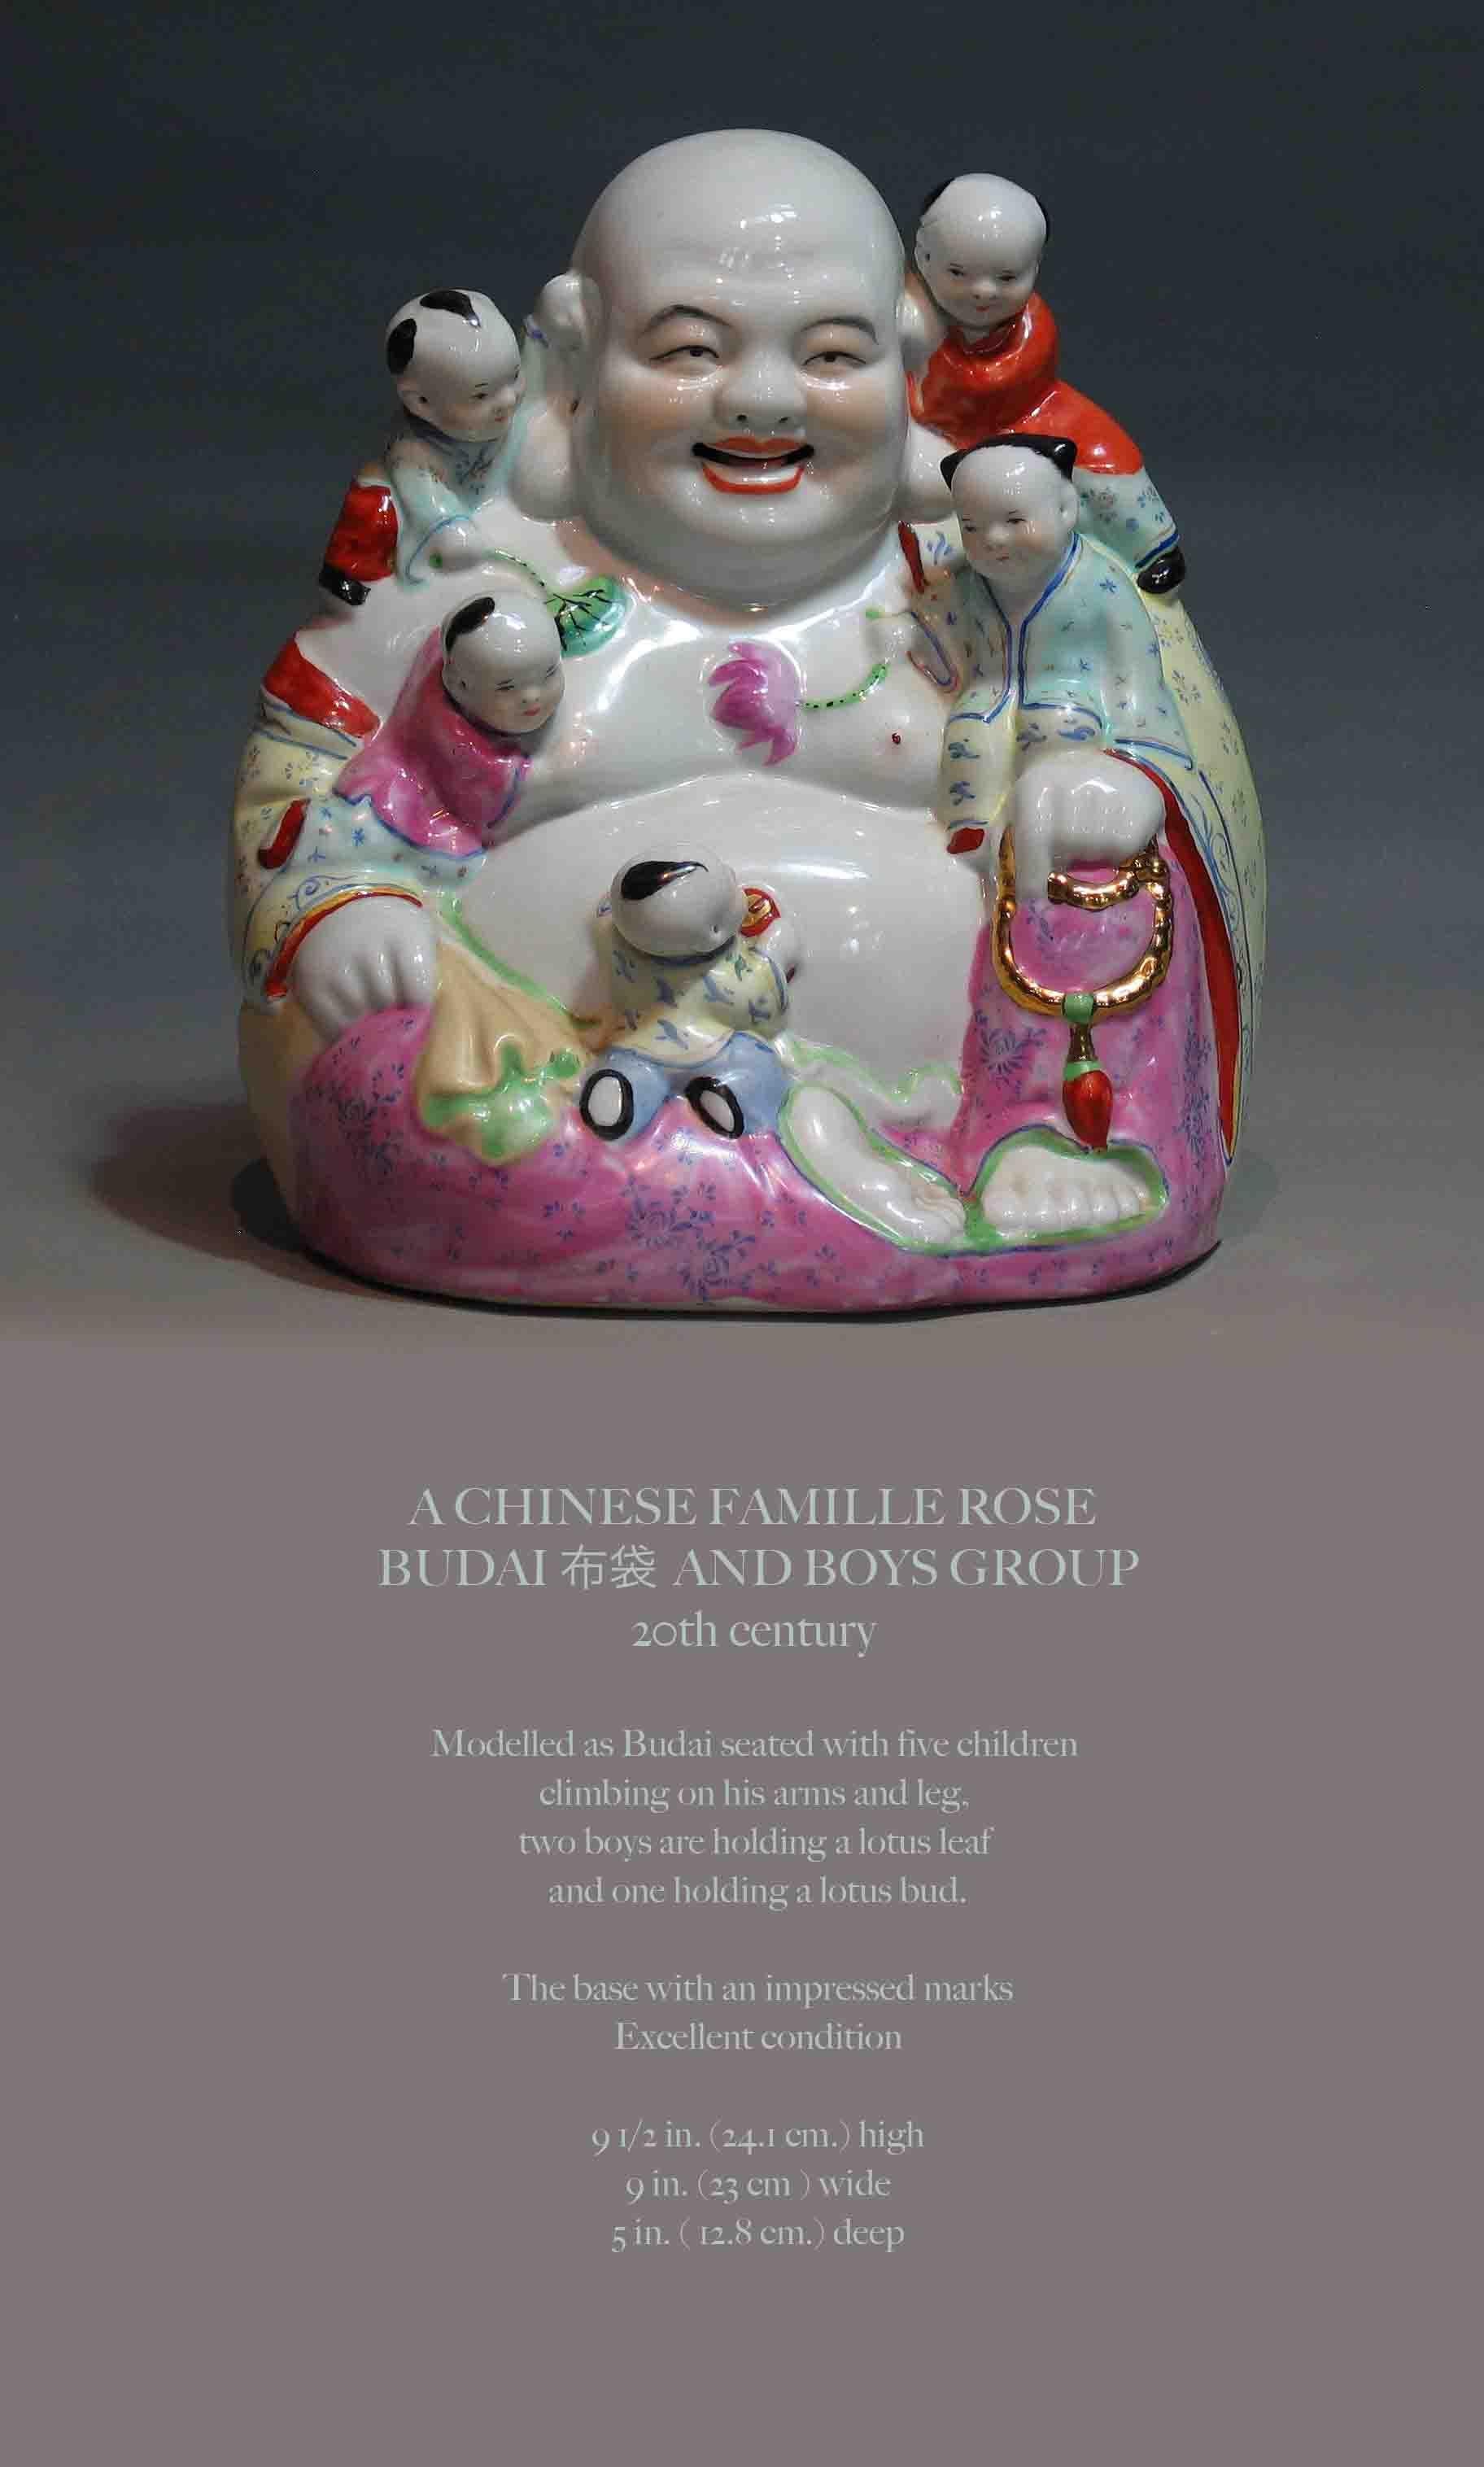 A CHINESE FAMILLE ROSE BUDDHA 
BUDAI ?? AND BOYS GROUP
20th century 

Modelled as Budai seated with five children 
climbing on his arms and leg, 
two boys are holding a lotus leaf 
and one holding a lotus bud.

The base with an impressed